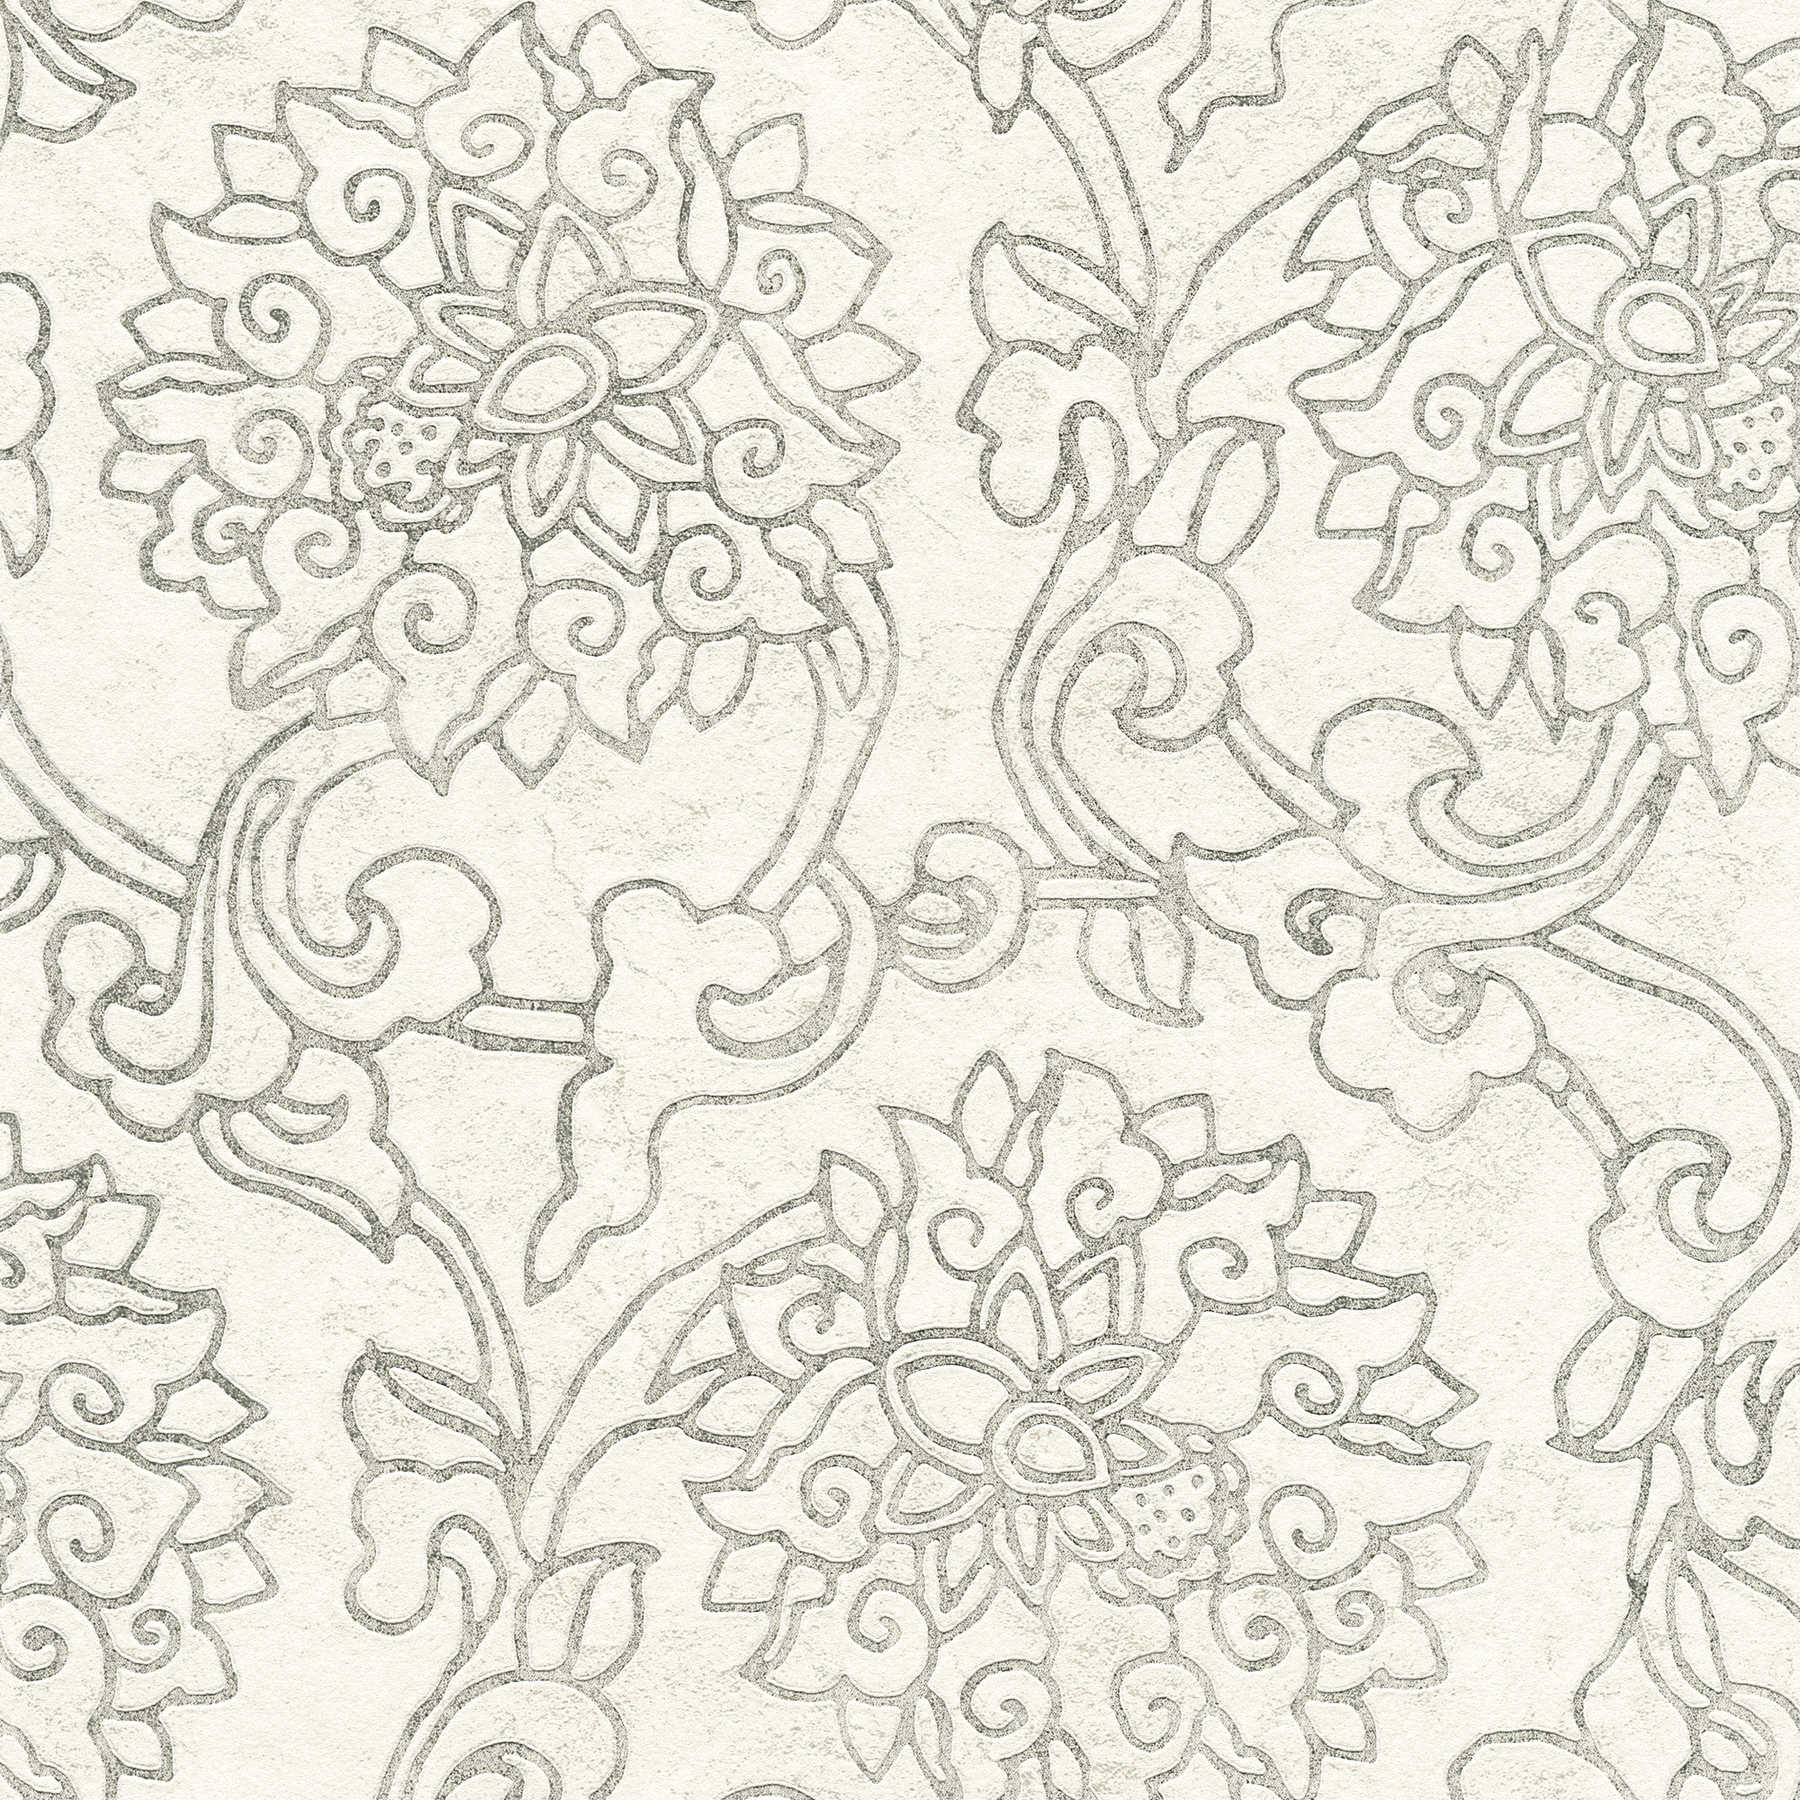 Floral ornament wallpaper in Asian style with gold accents - white, silver, grey
